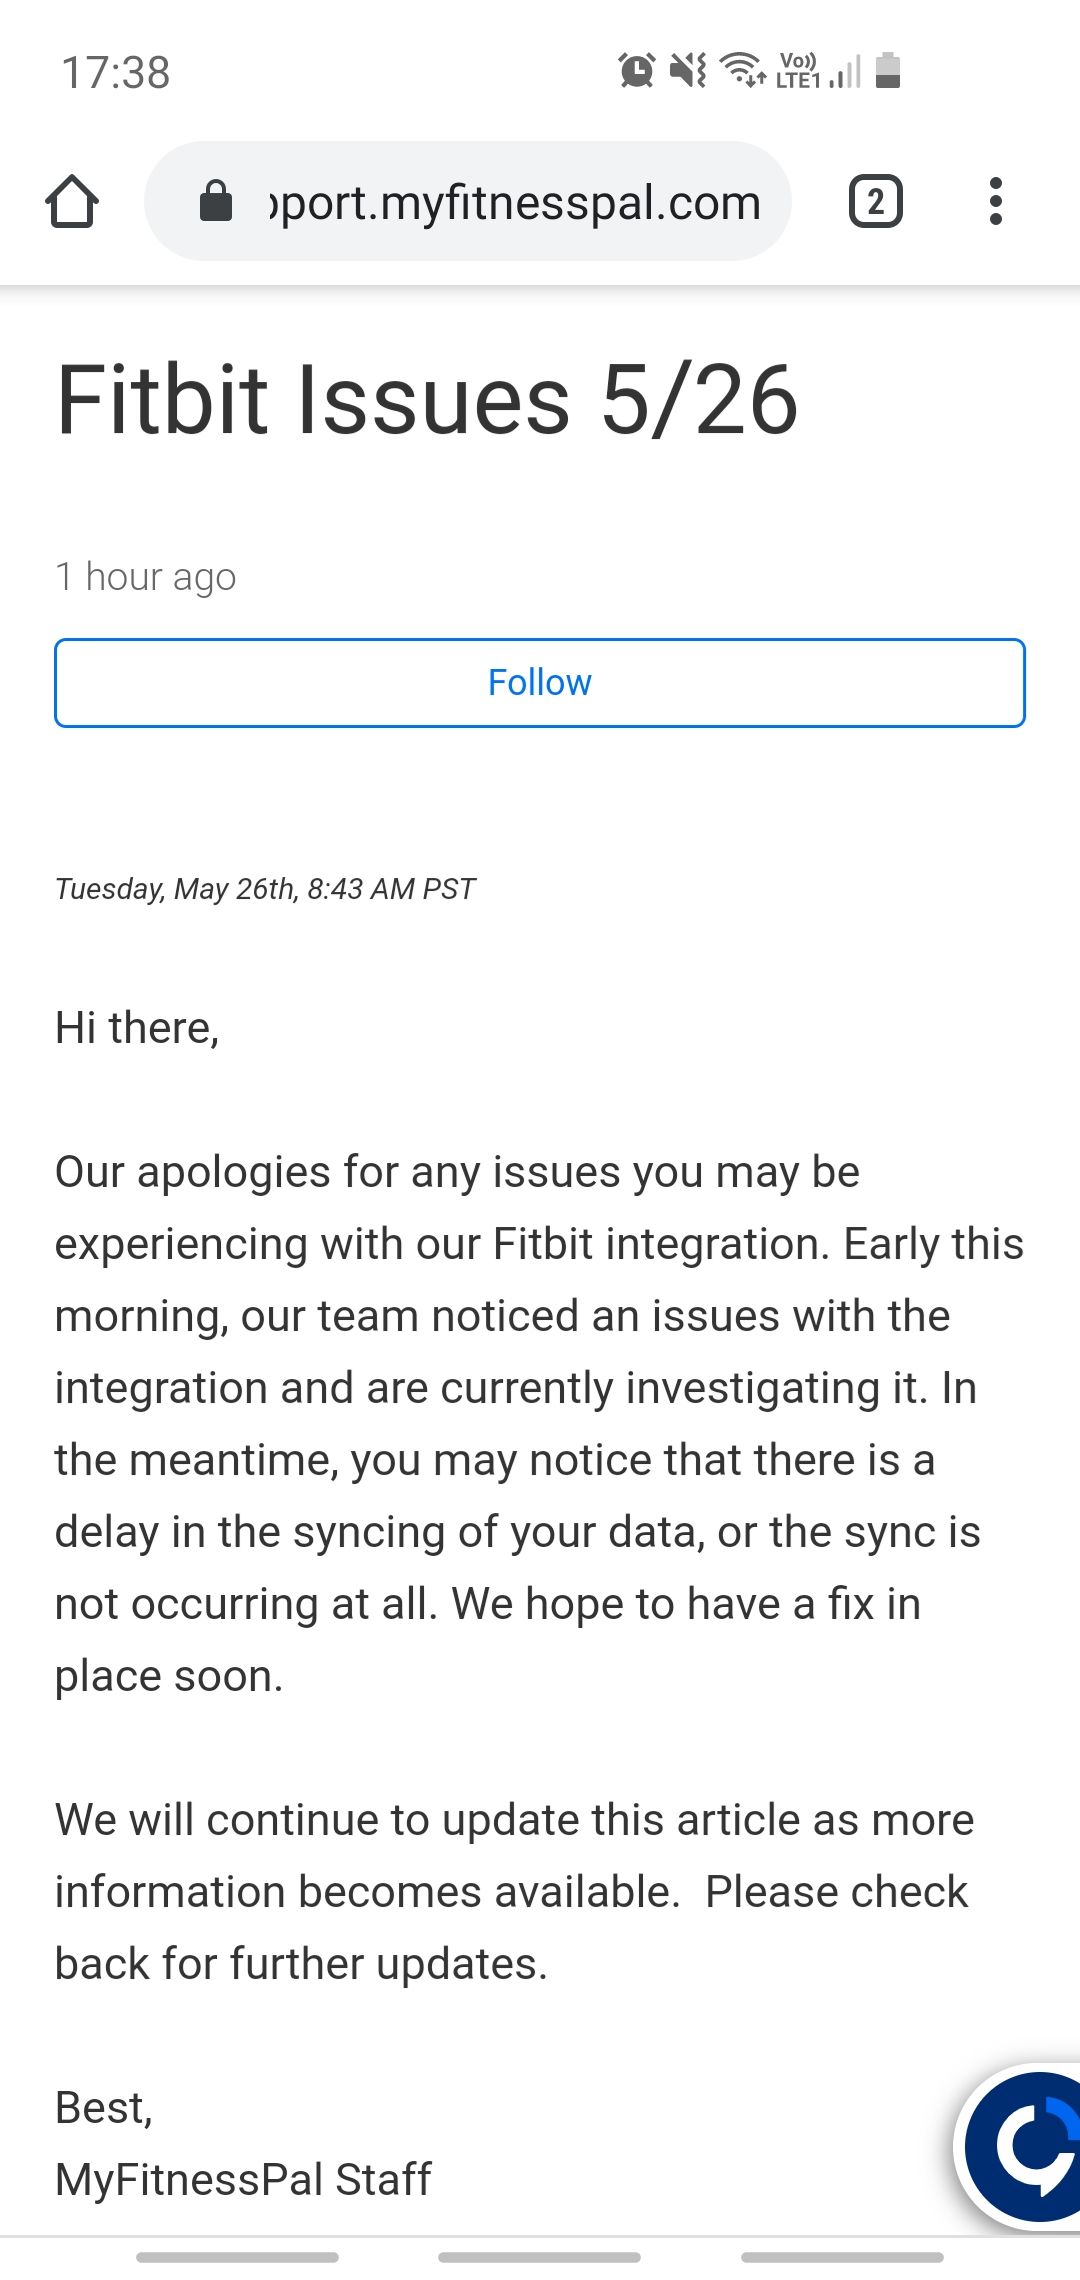 myfitnesspal stopped syncing with fitbit